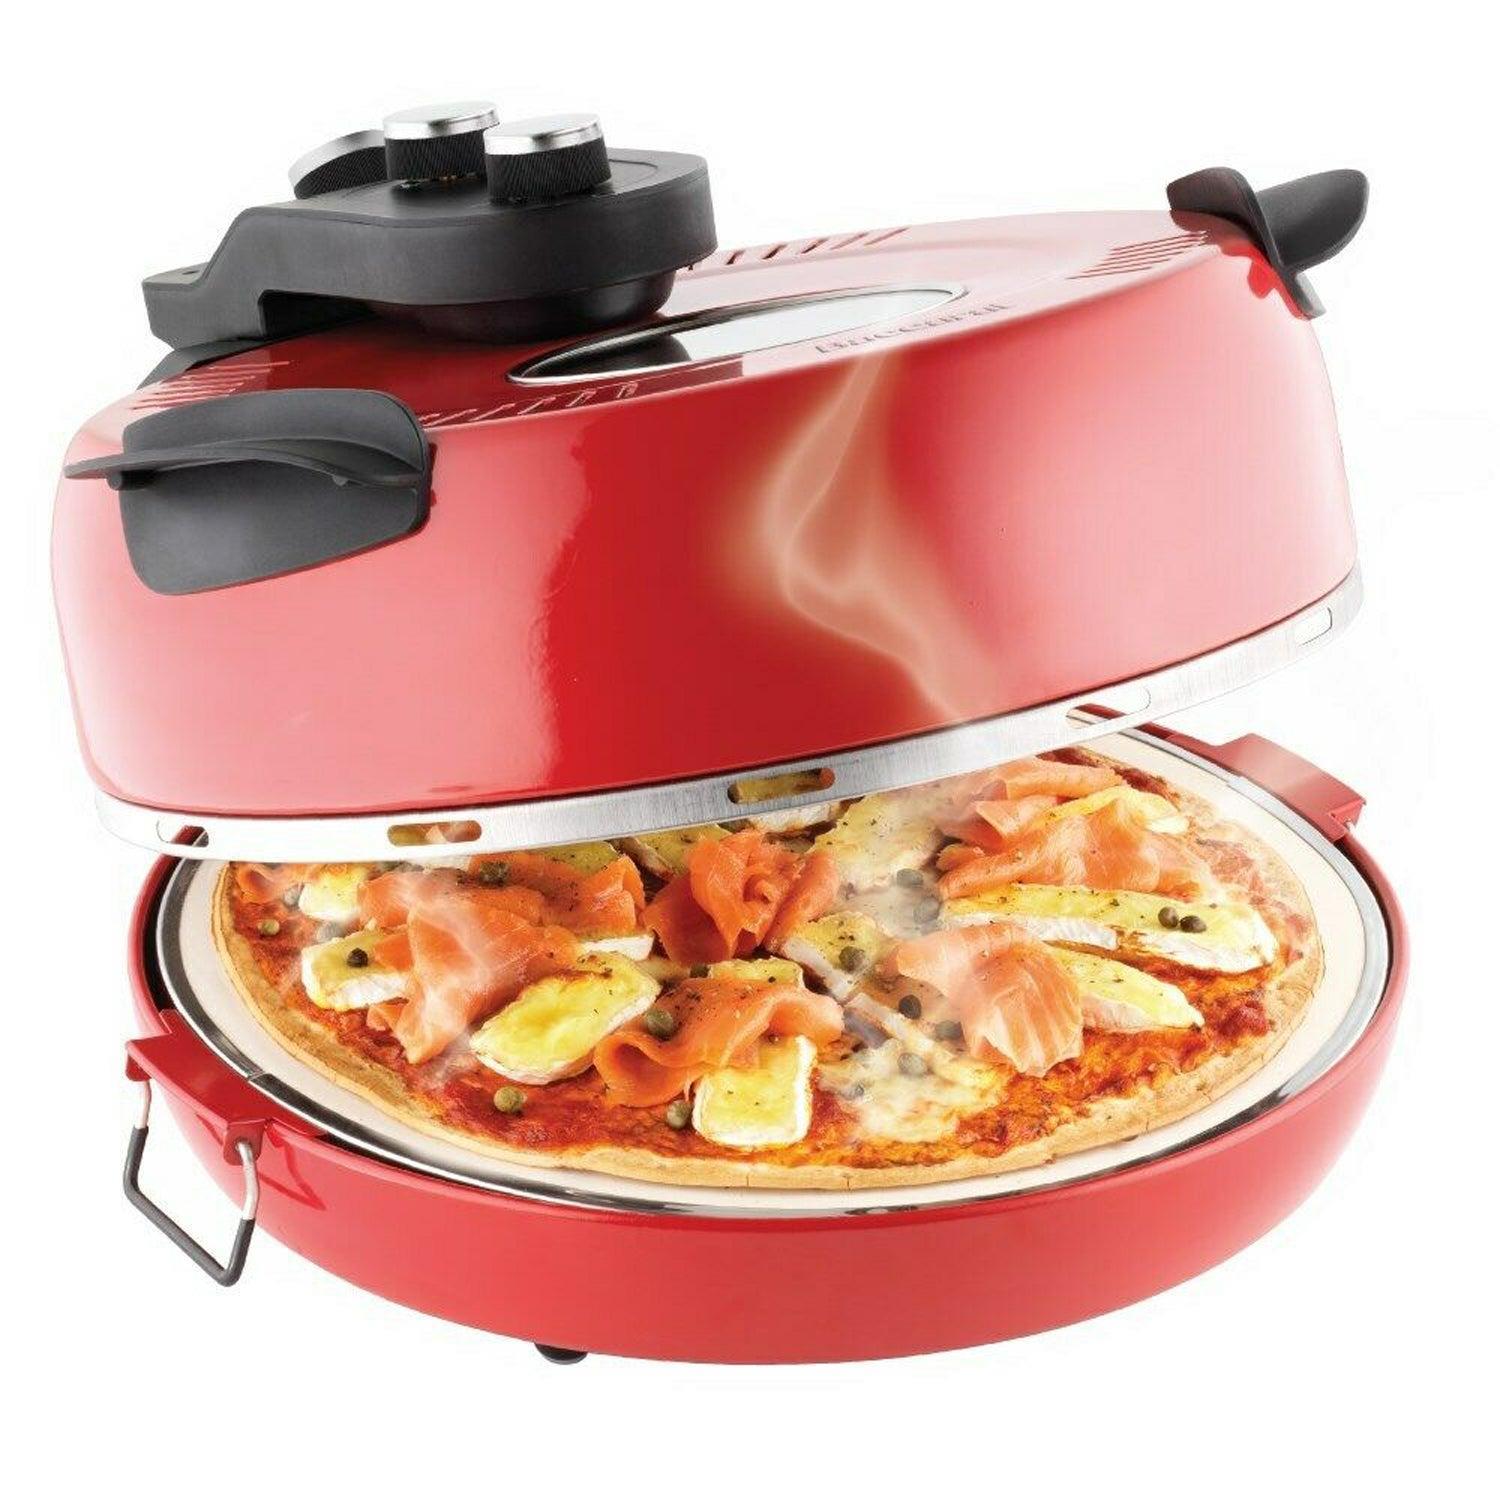 Gourmet Pizza XL Oven - Red